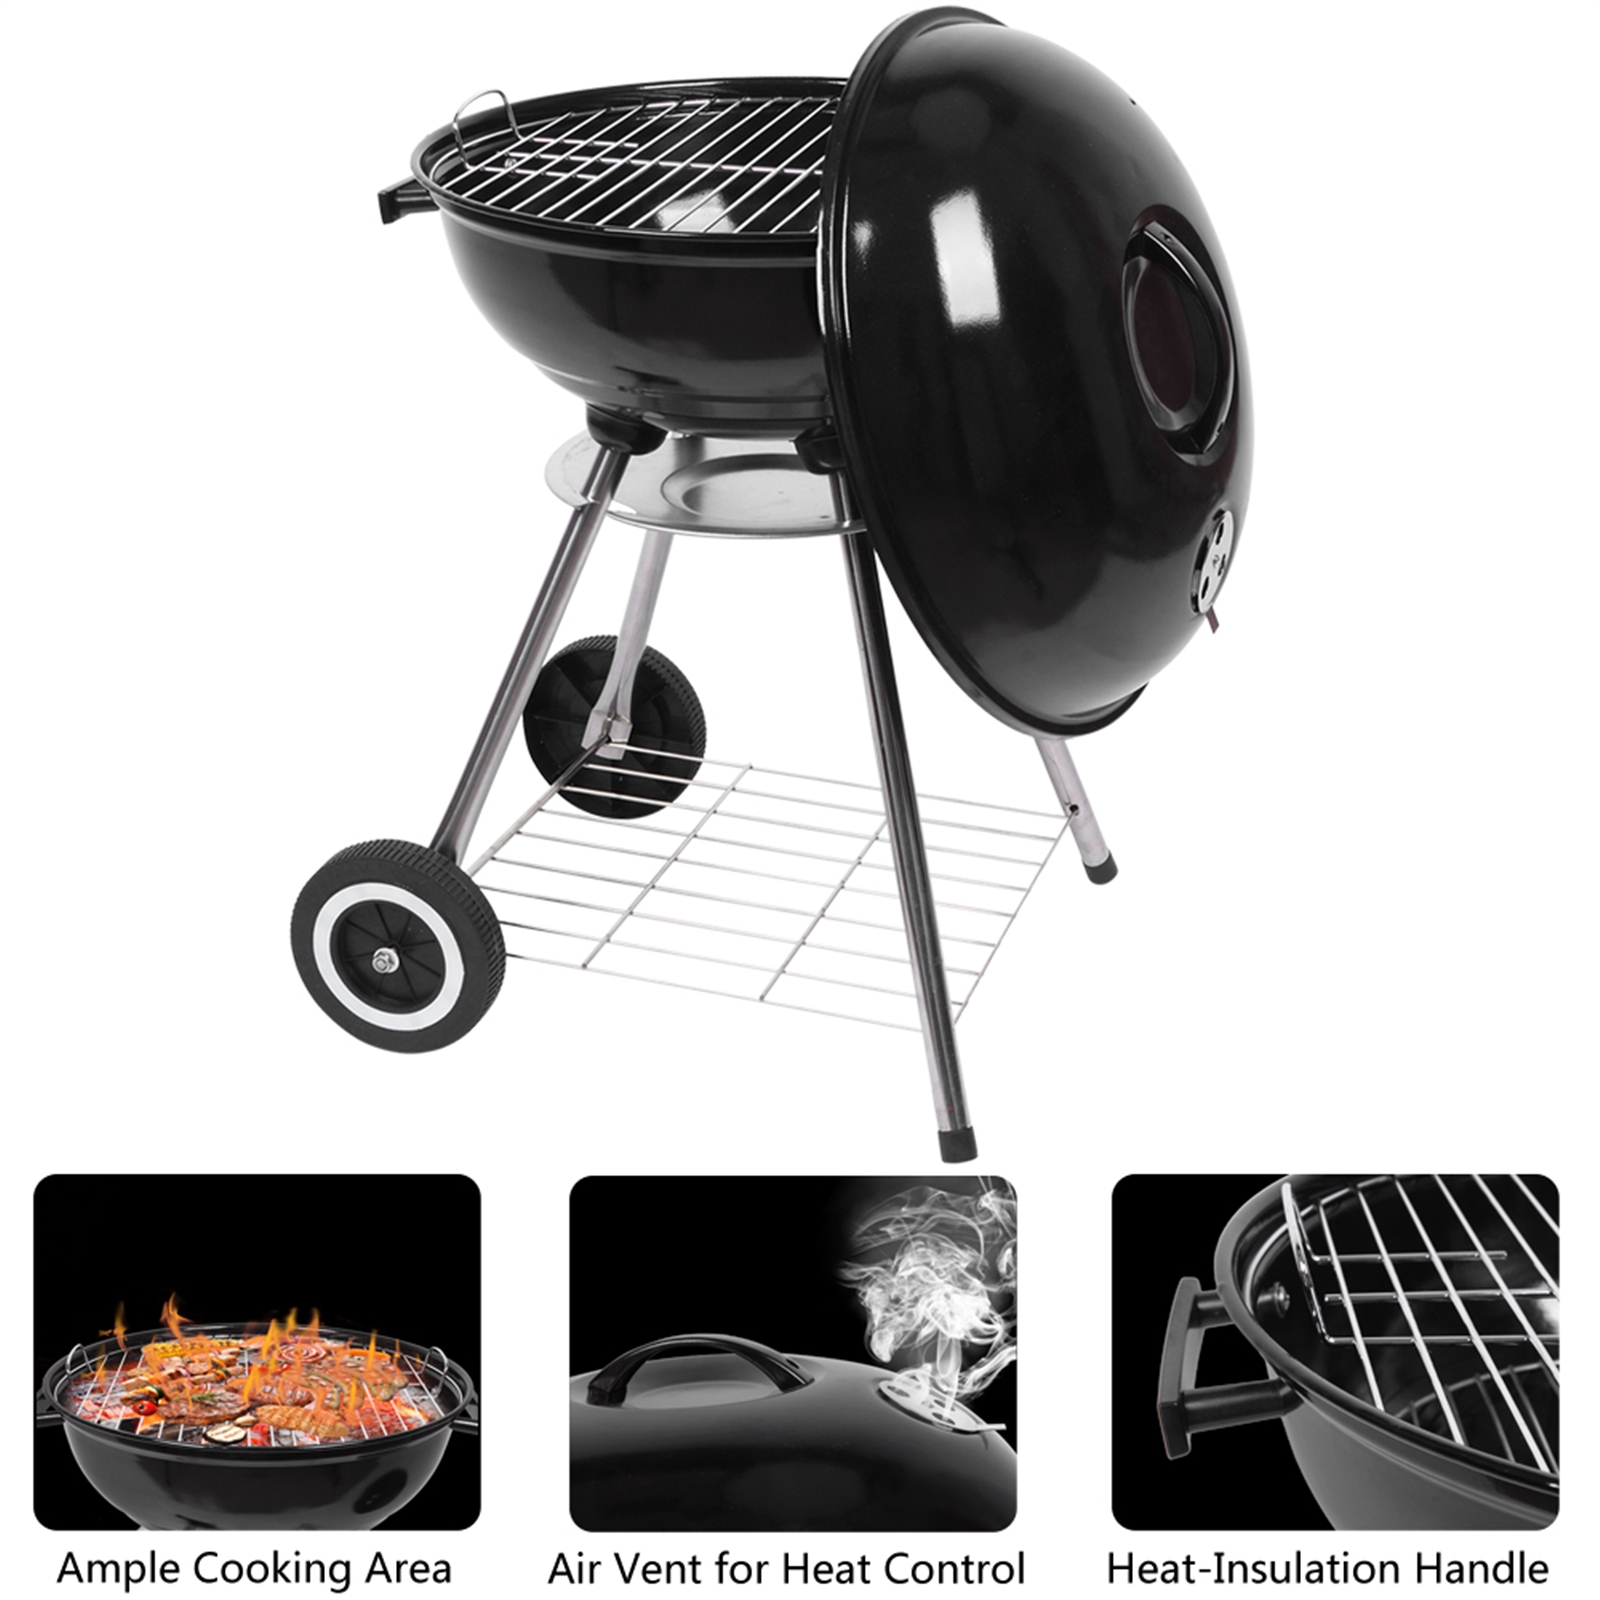 Goorabbit Charcoal Grill On Sale,18 Inch Apple Charcoal Stove Enamel (Cover Furnace Body) 2 Side Wheels Diameter 5.91" Portable Charcoal,Black - image 5 of 14